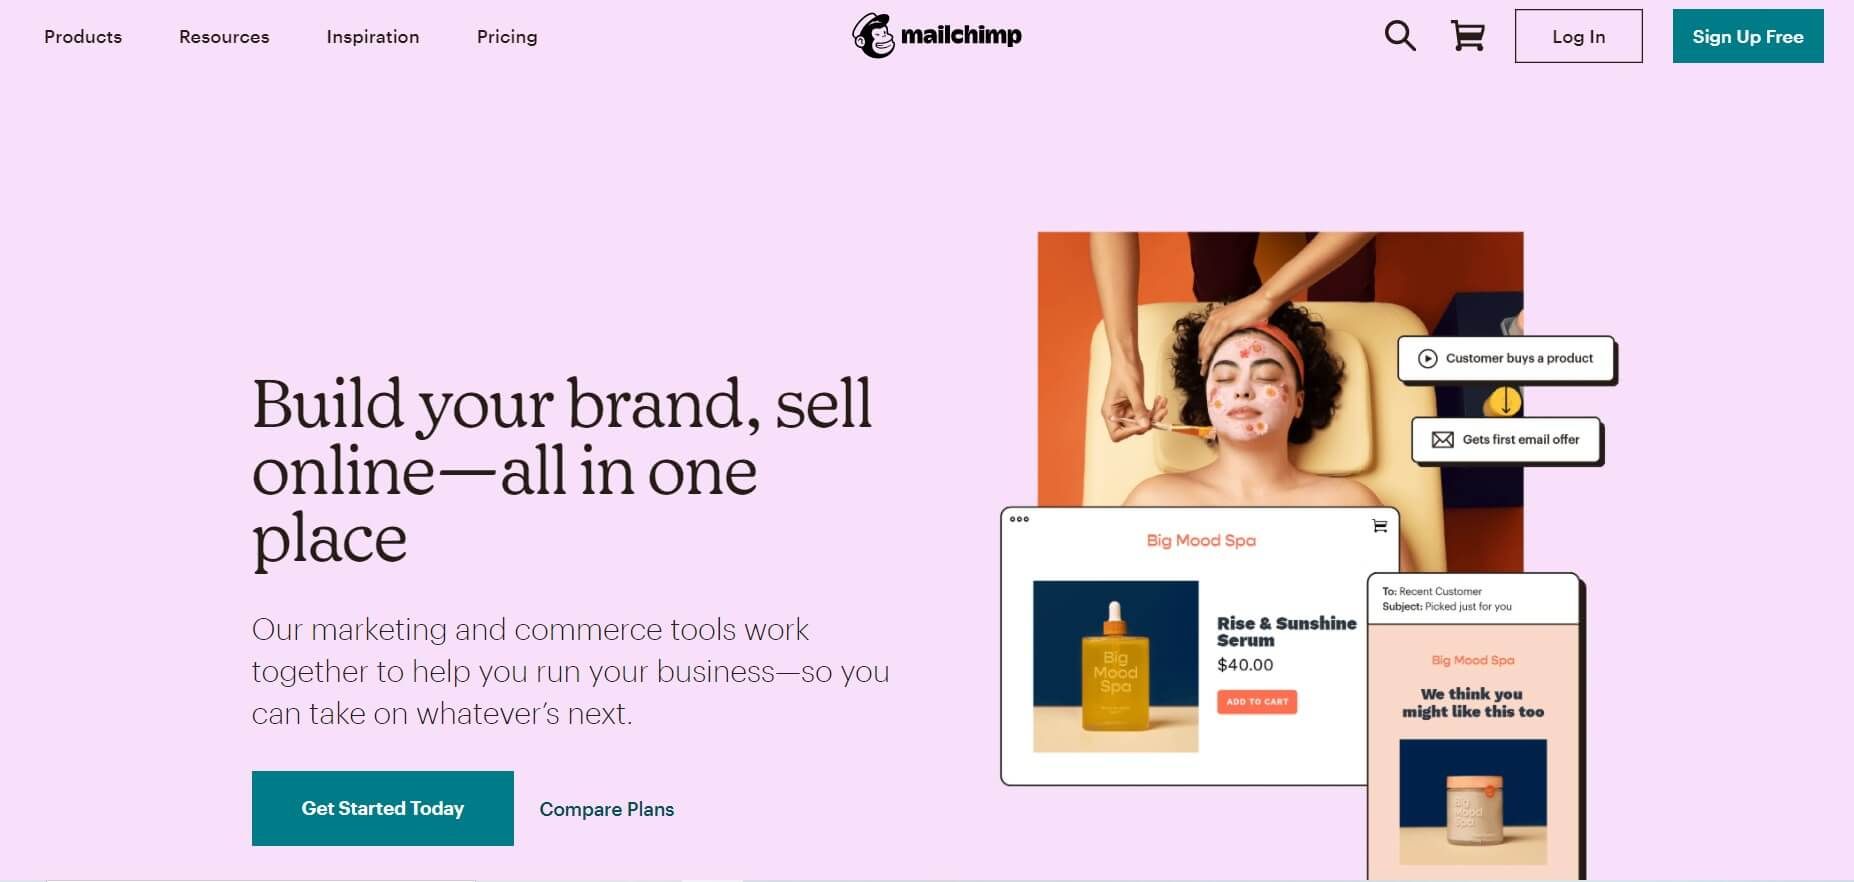 A screenshot of the MailChimp homepage.